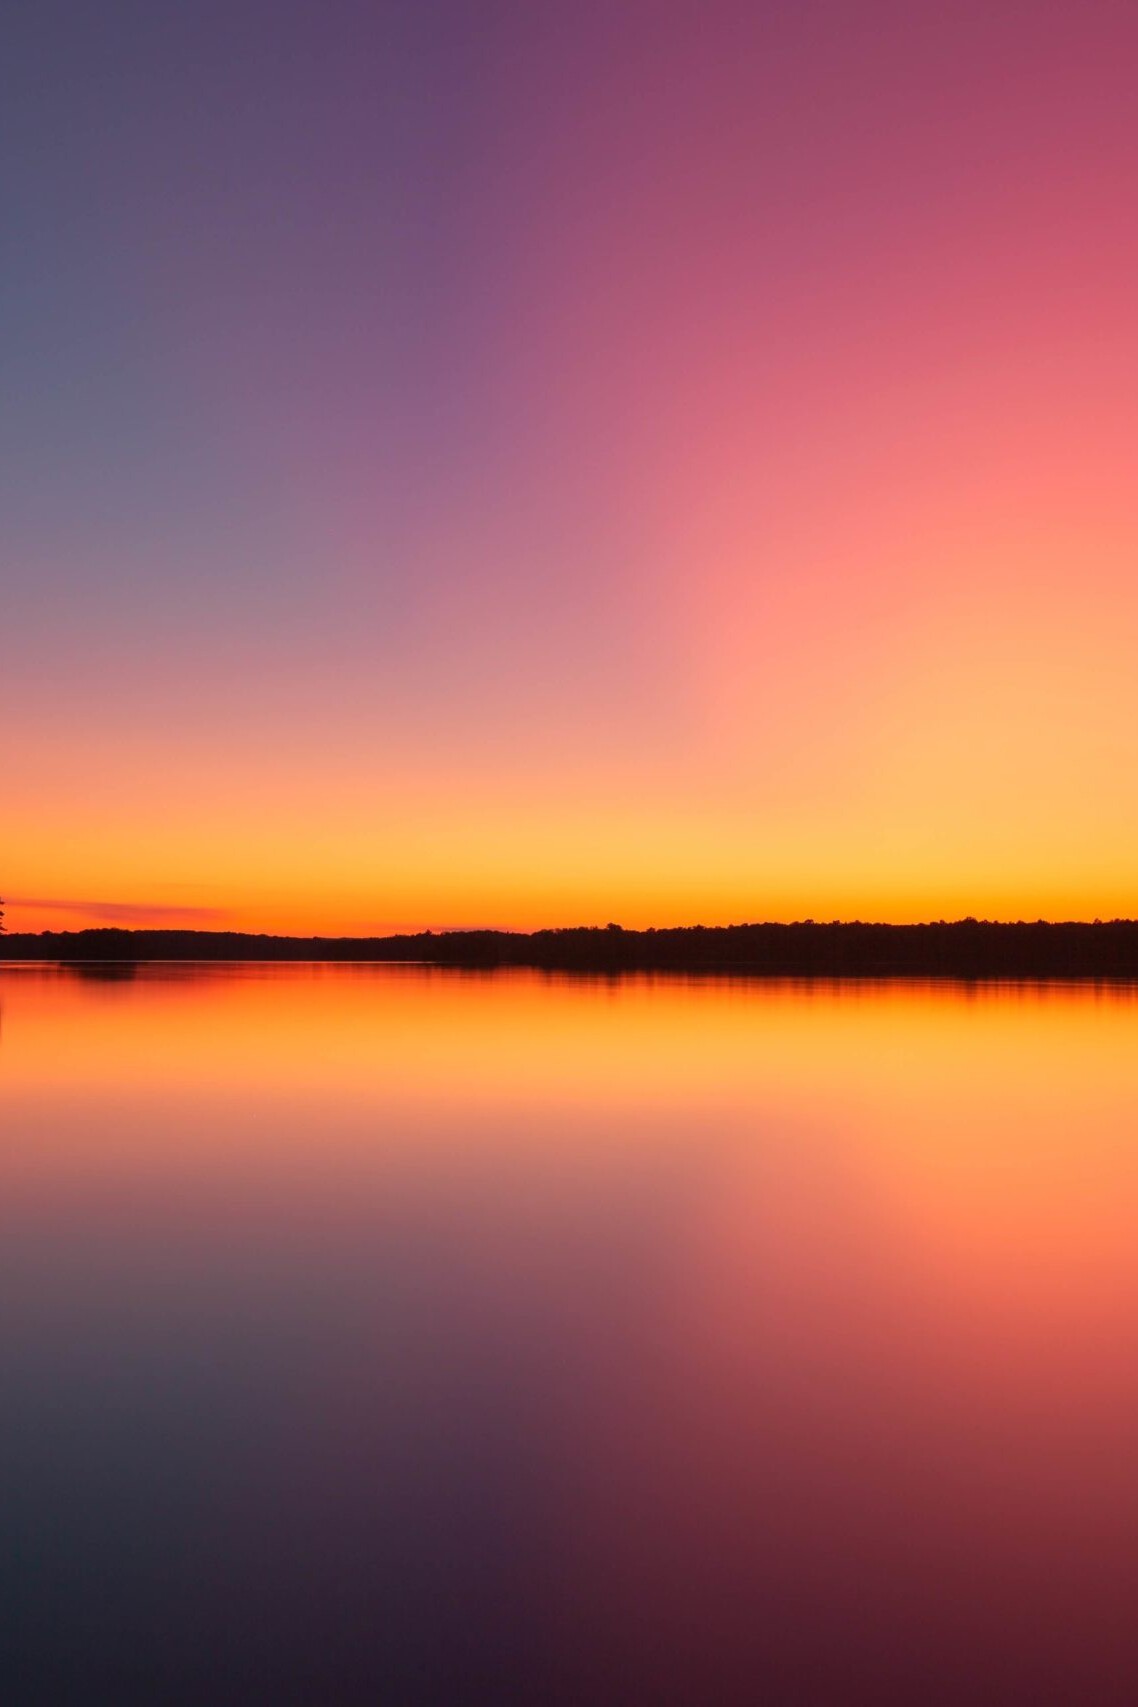 View of a sunset on a lake or river.